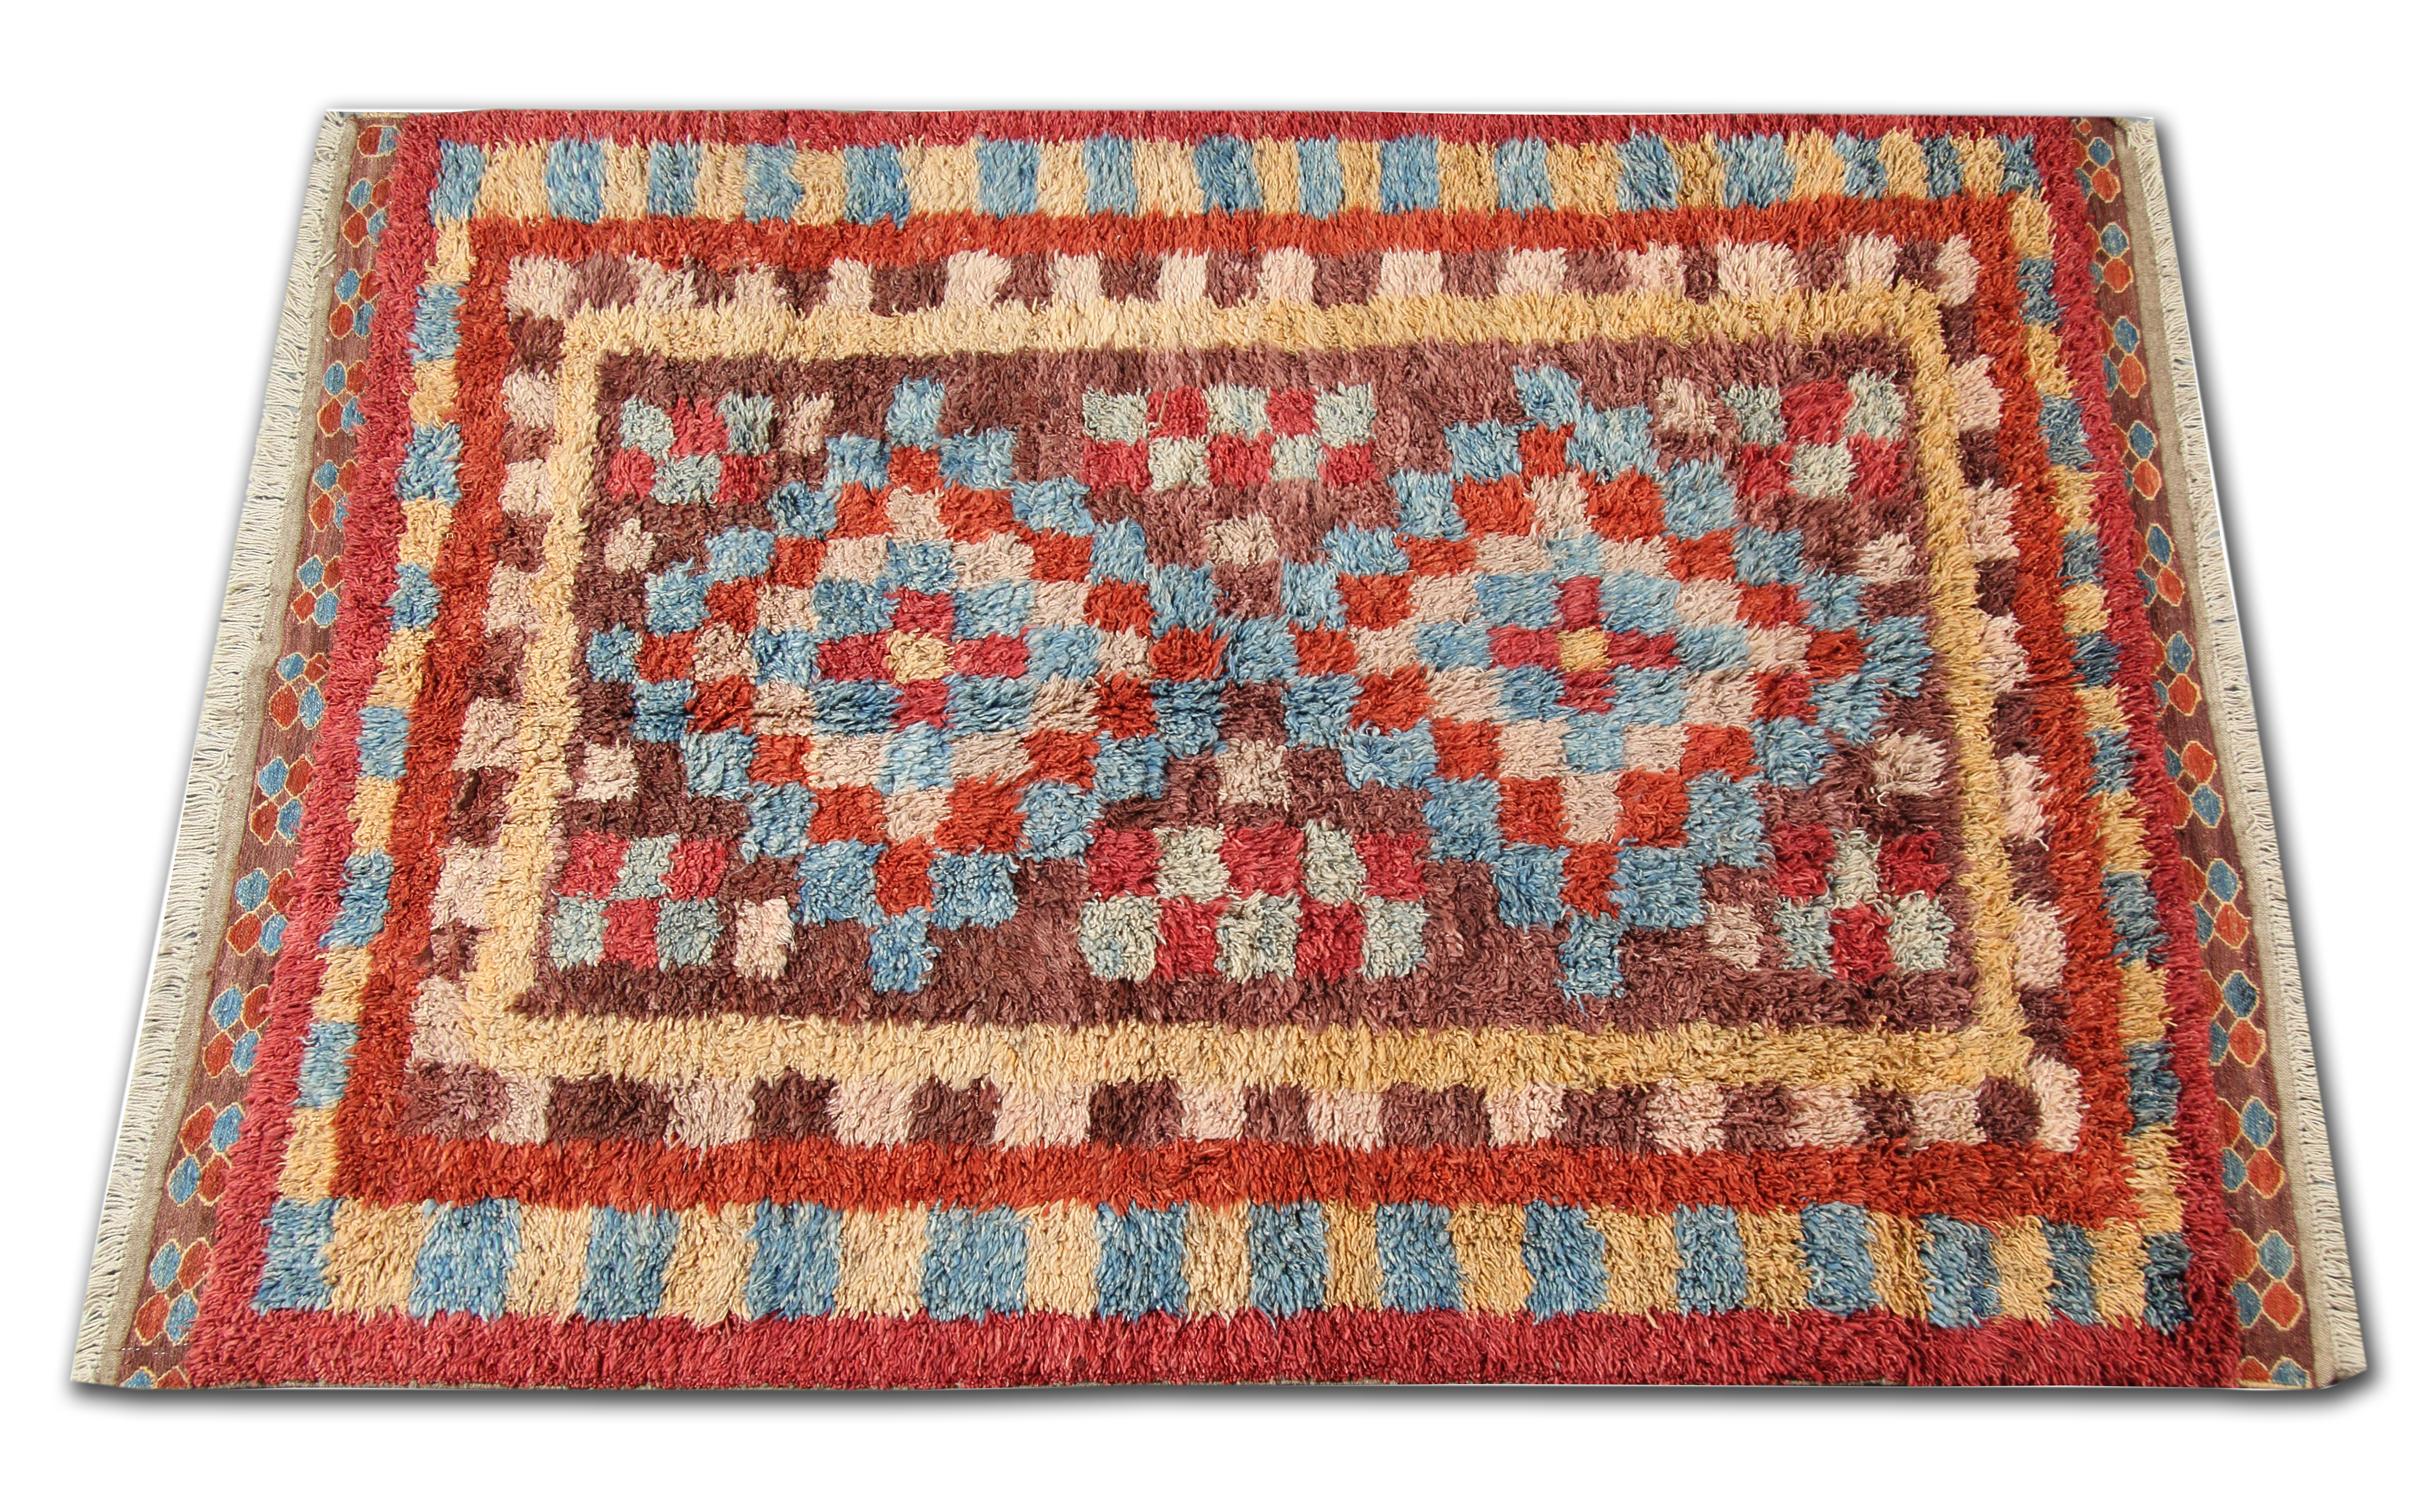 Tribal Handmade Carpet Moroccan Rugs, Shag Rugs, Pink and Red Primitive Carpet for Sale For Sale